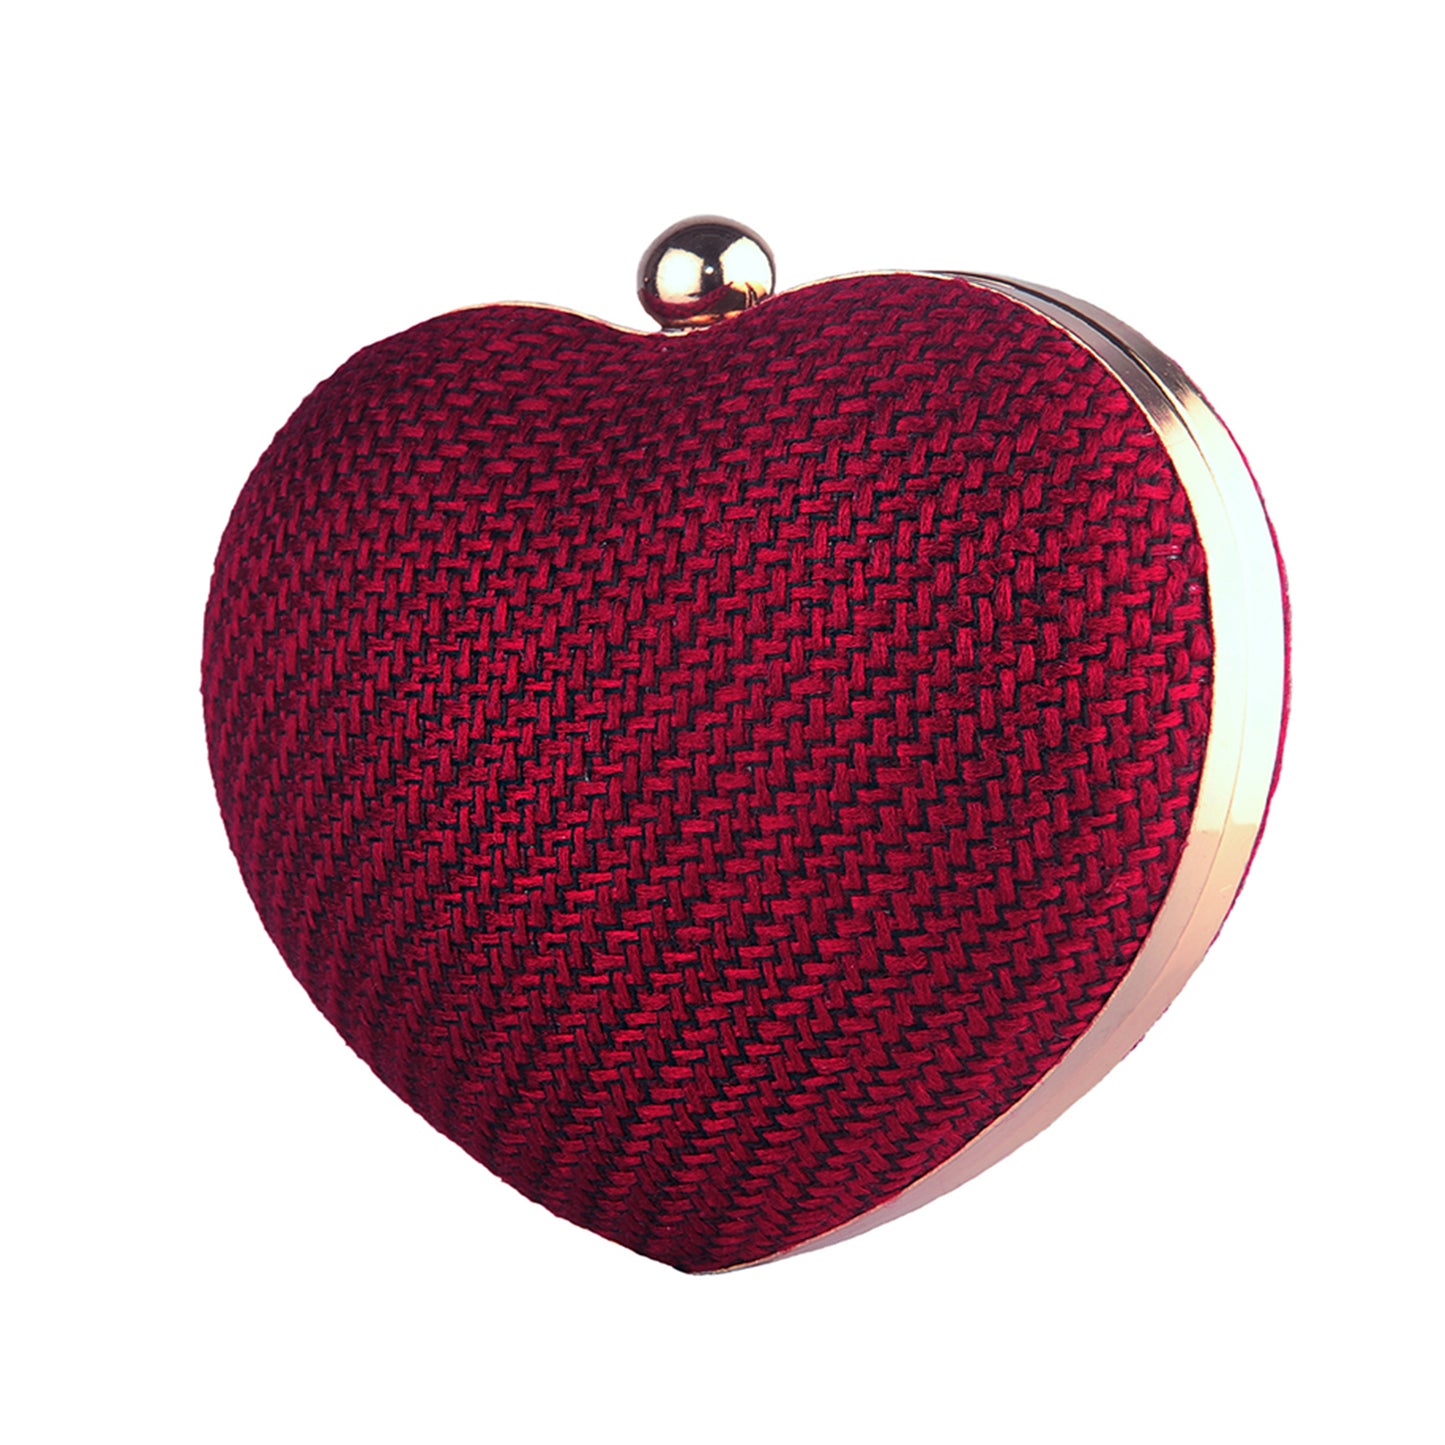 Red Jute Clutch bag from the Heart